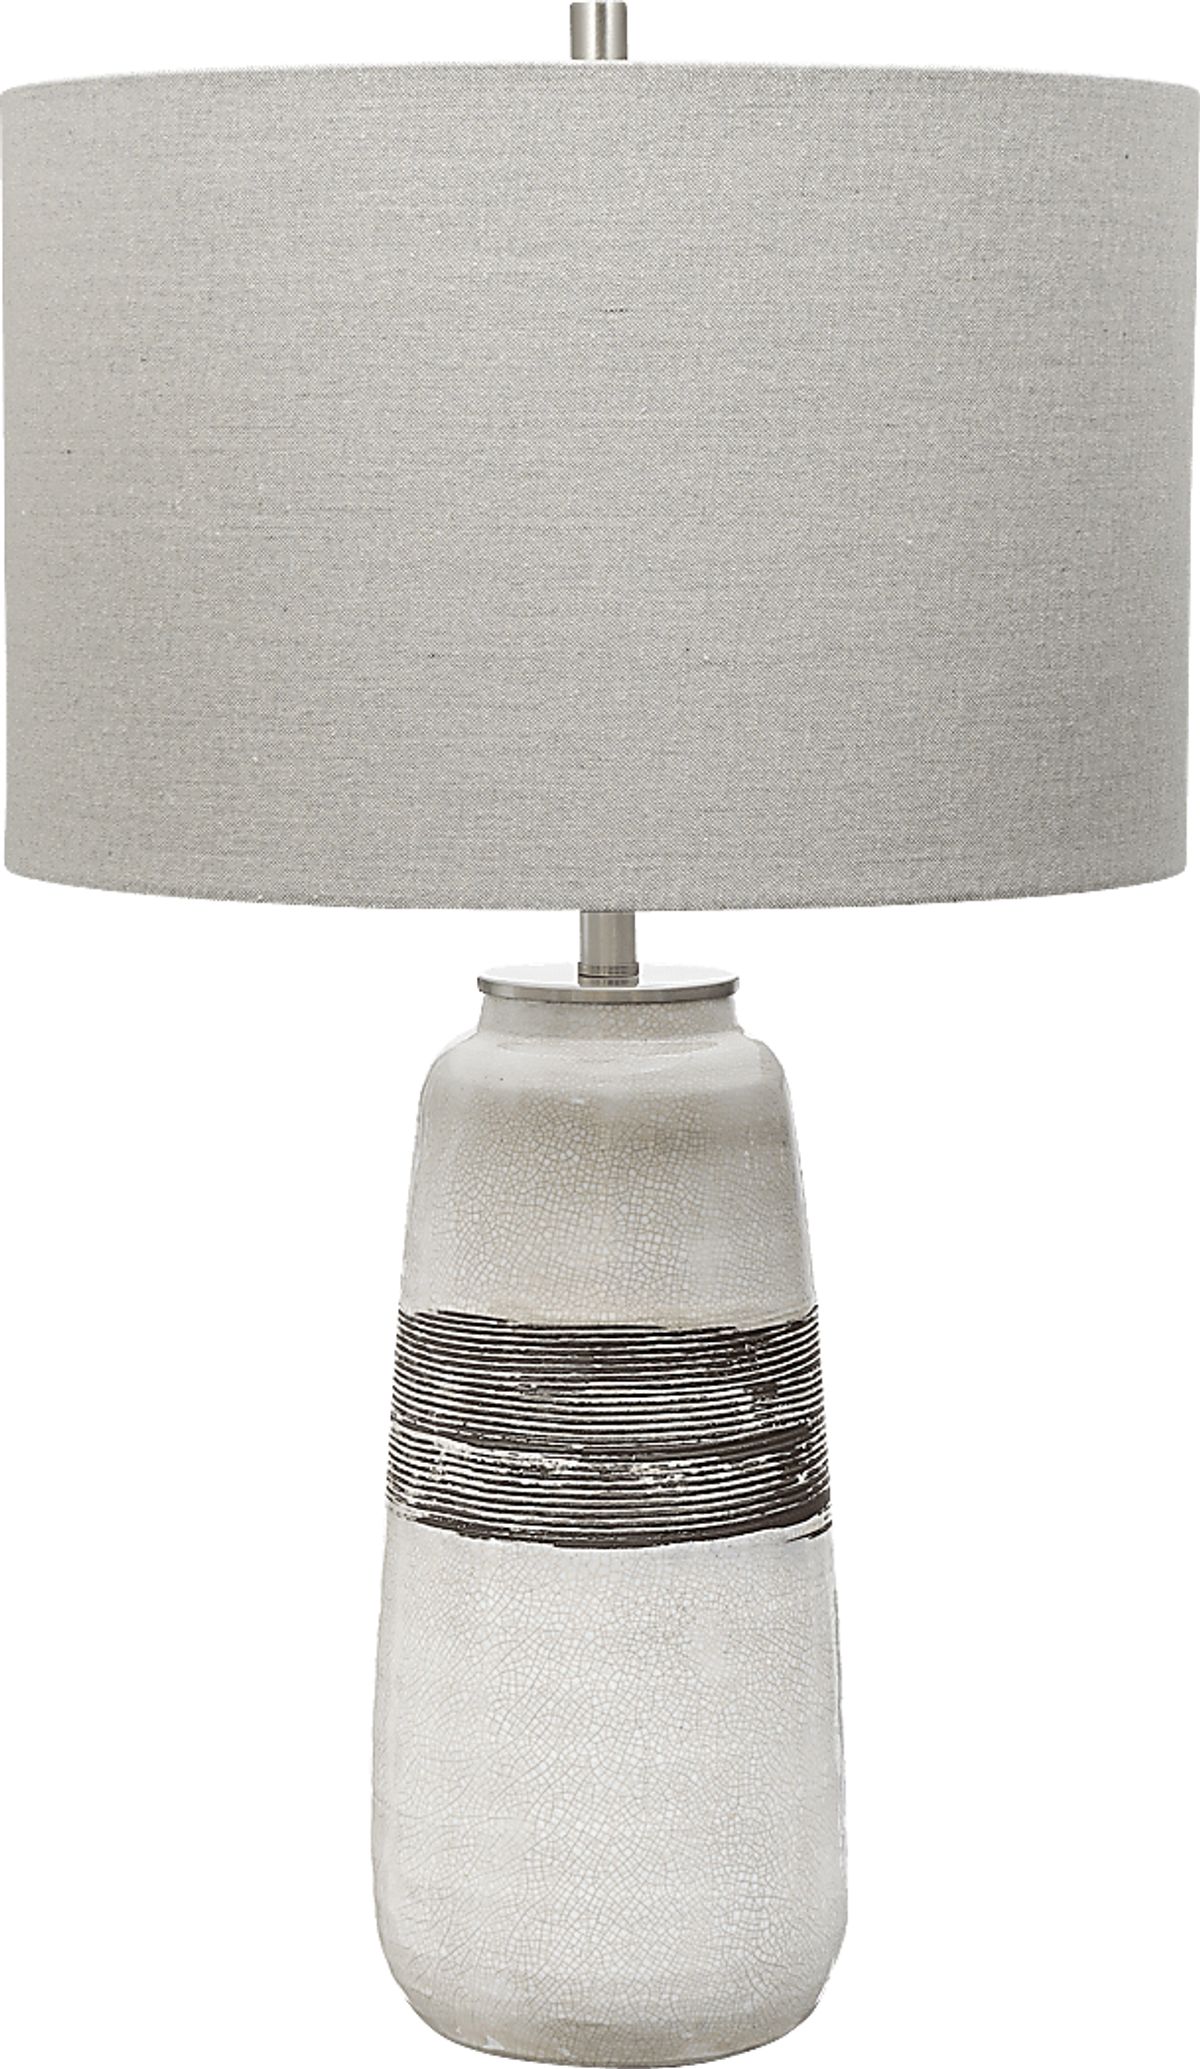 Actinia Point White Table Lamp | Rooms to Go